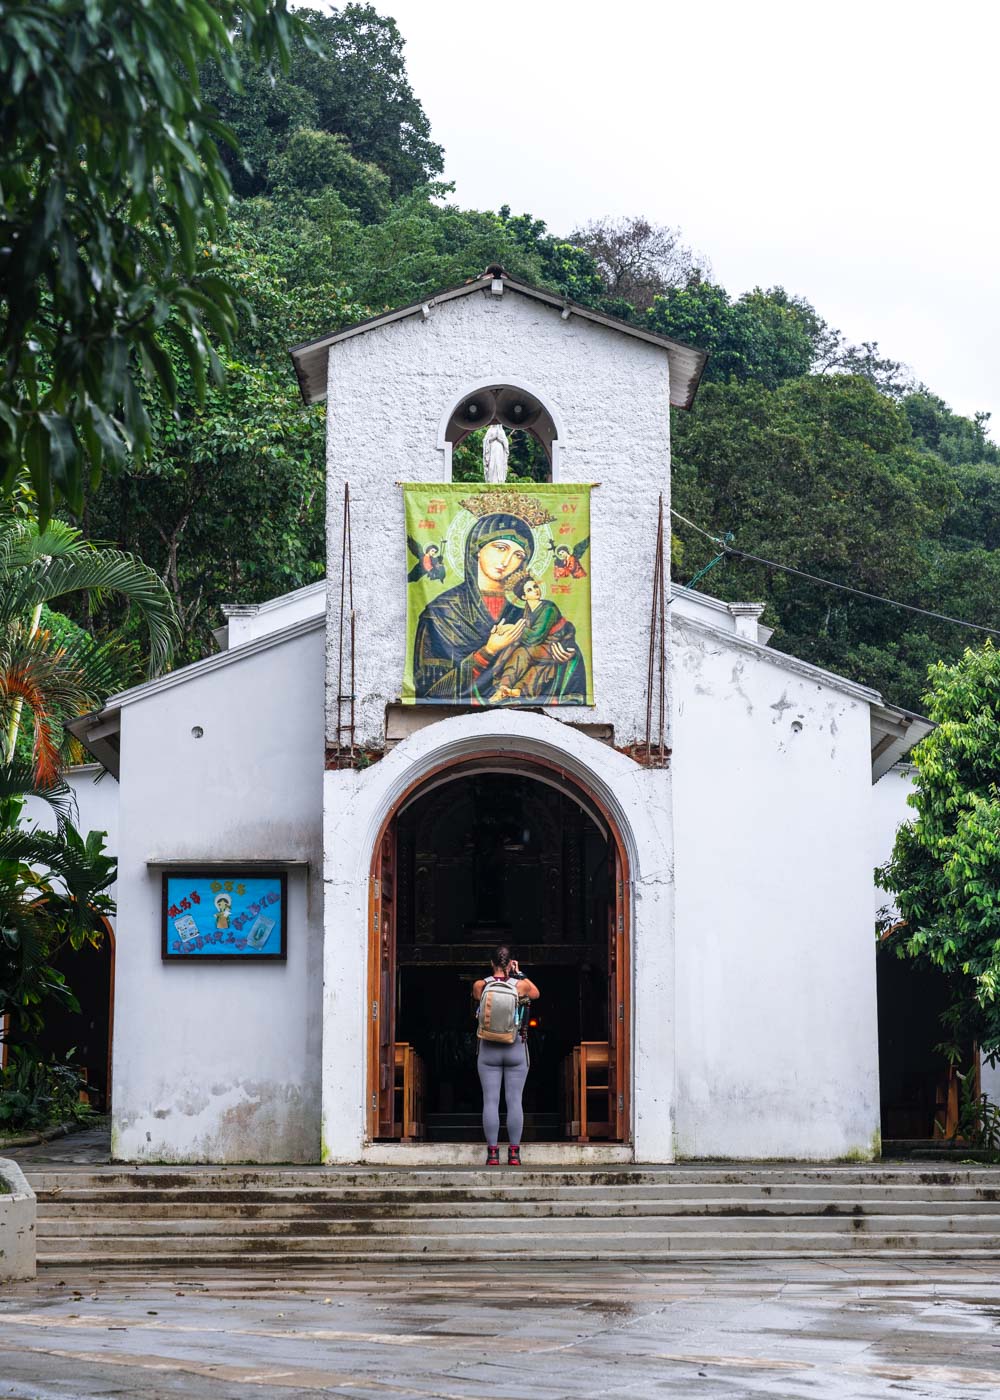 Sara standing in front of the white Church of Minca taking a photo.